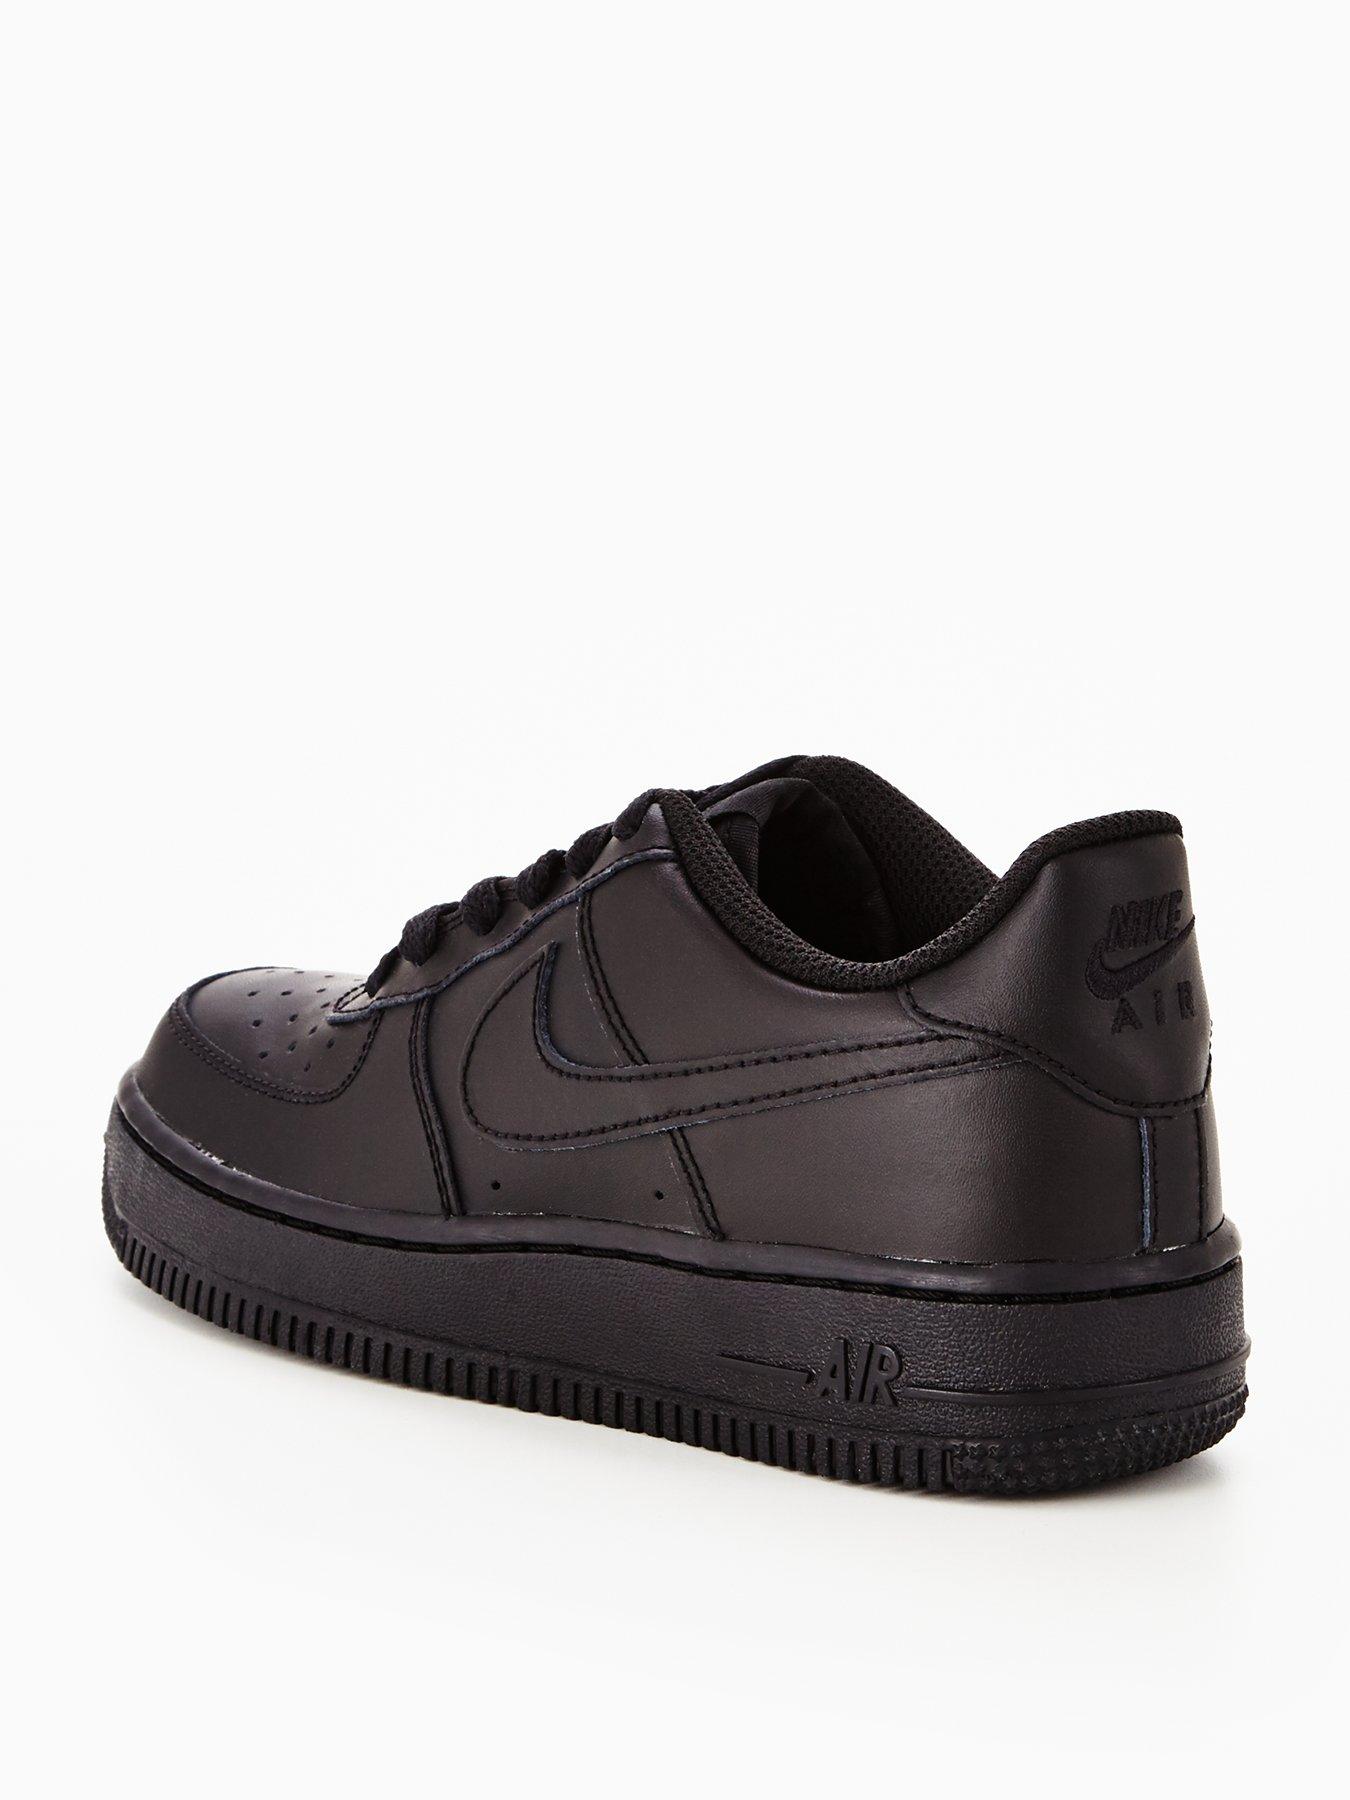 sports direct black air force 1